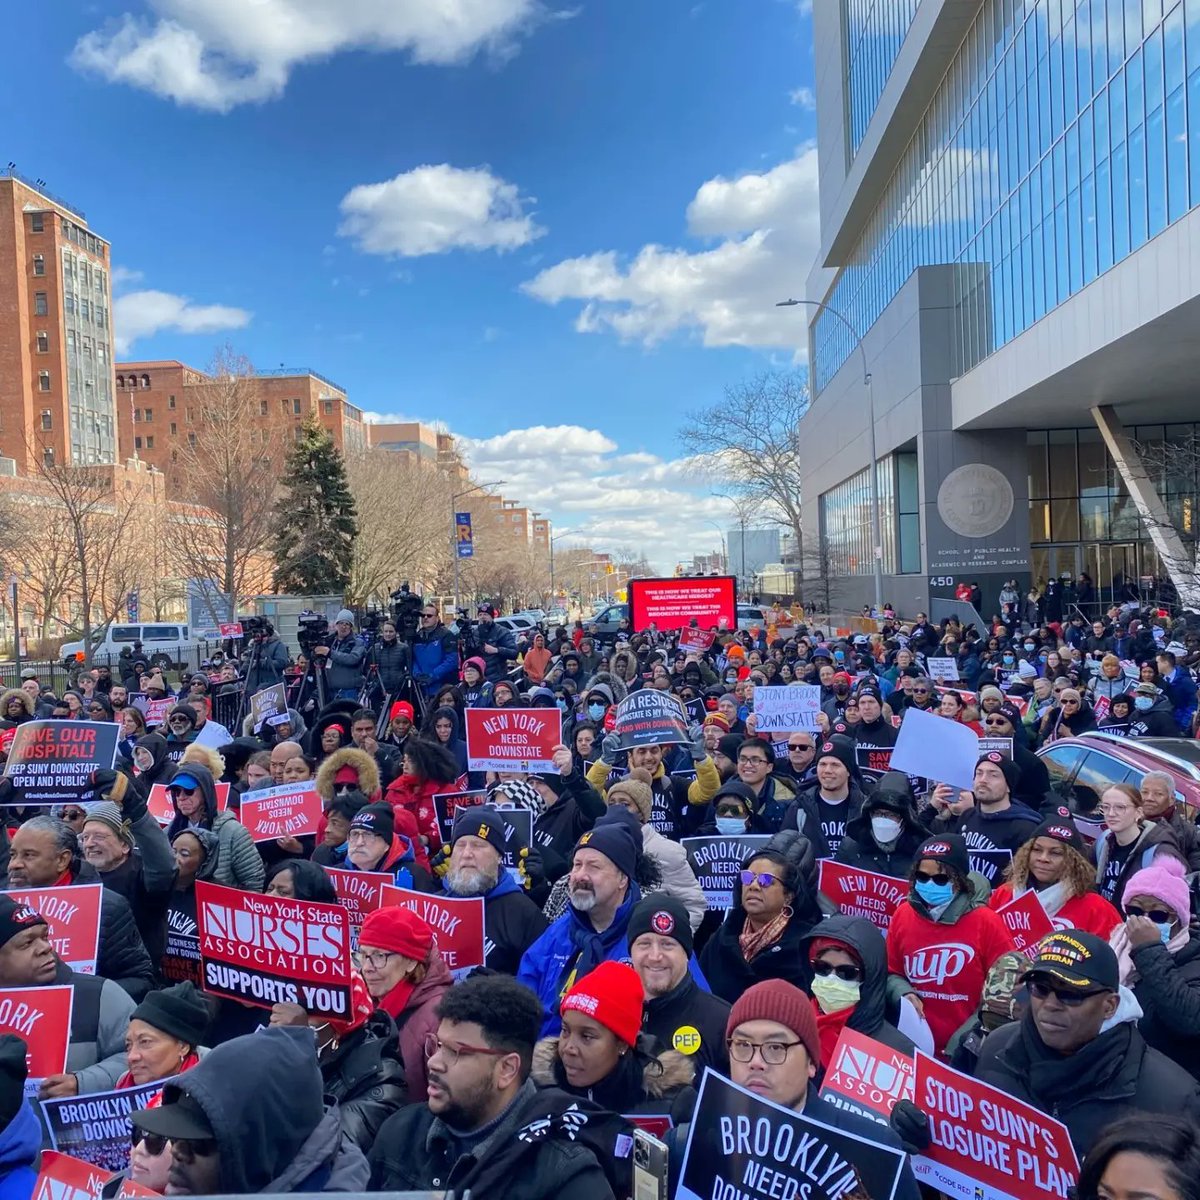 Last week I was proud to stand with Labor to reject austerity politics and stop the closure of SUNY Downstate. Black Central Brooklyn needs more healthcare, not less.